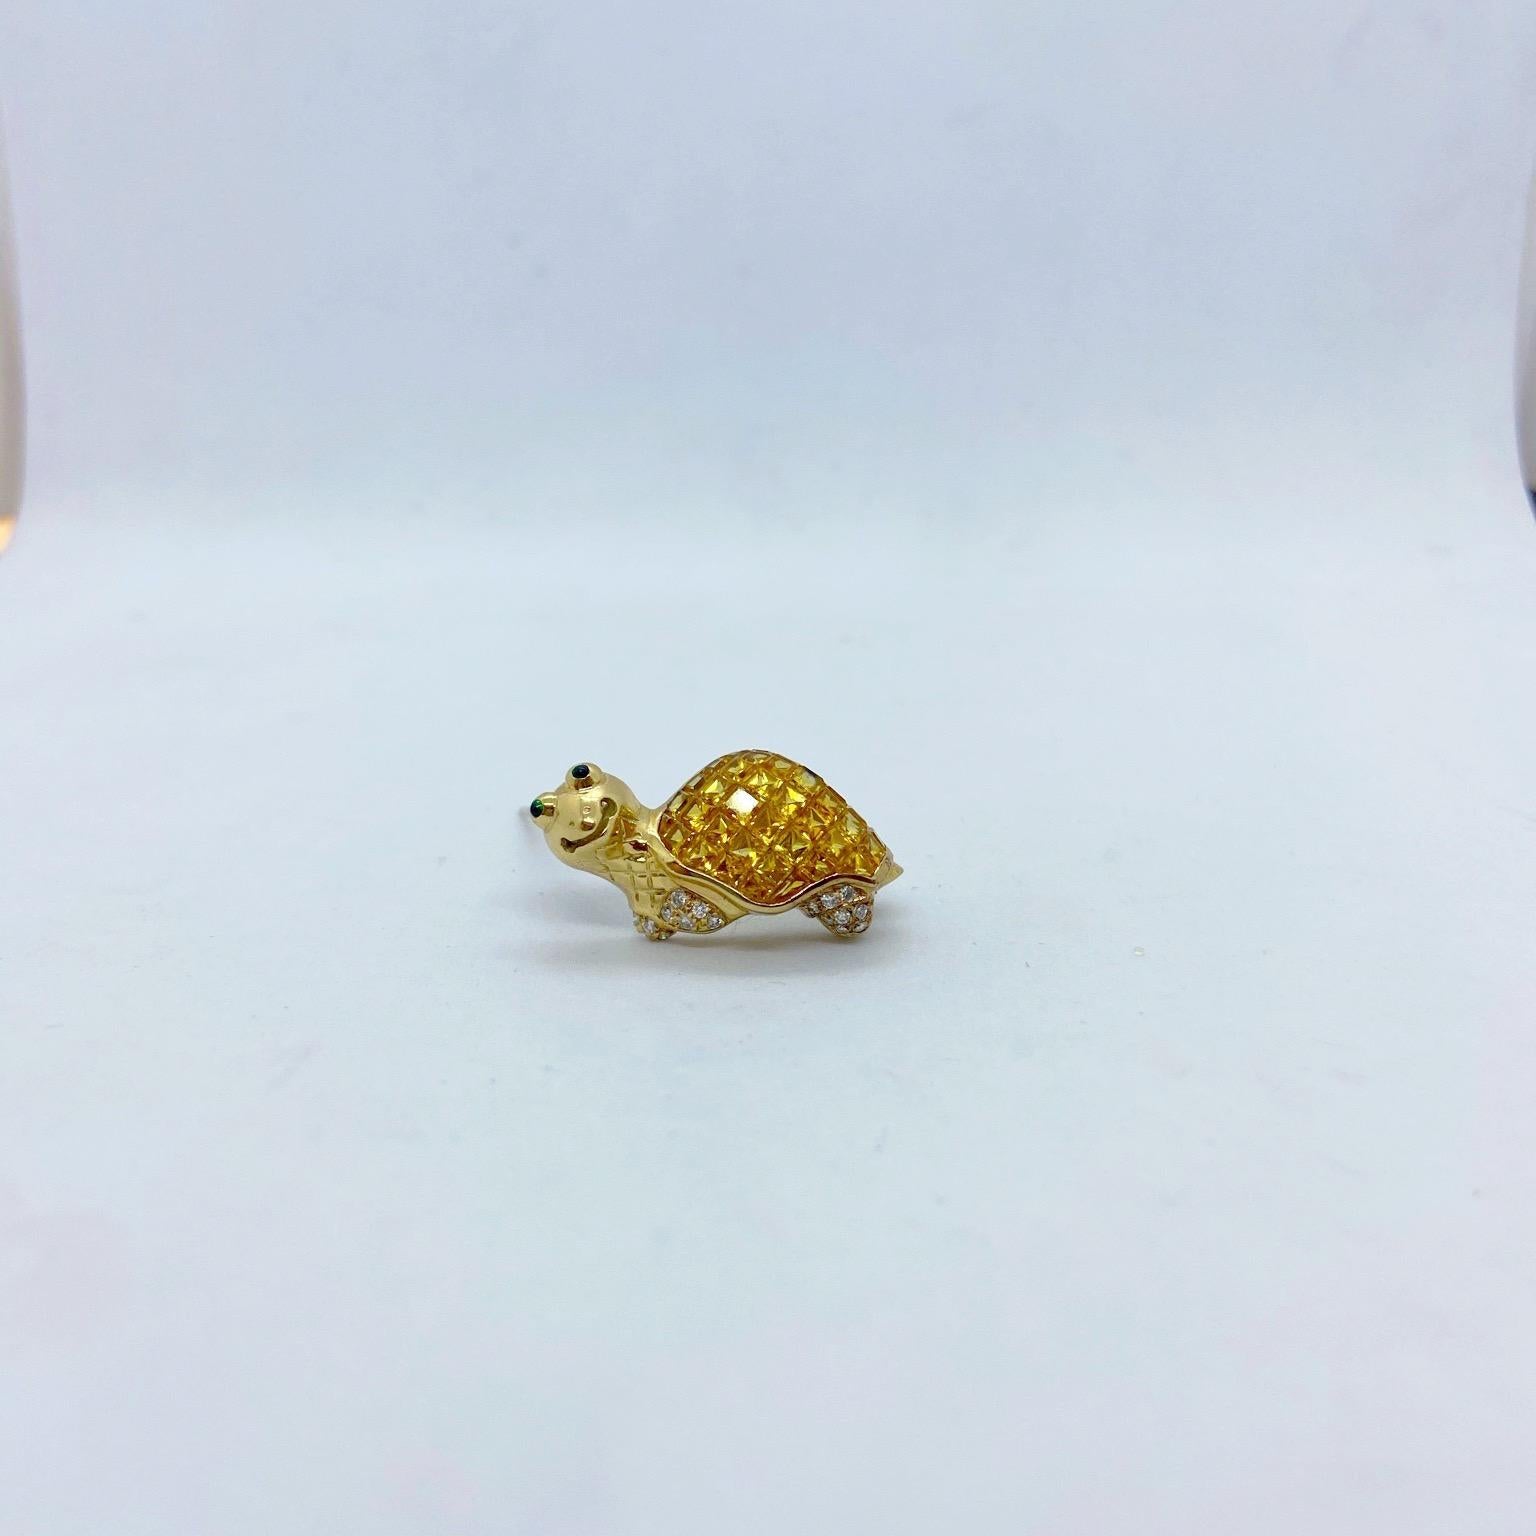 A beautifully crafted turtle brooch. The turtle shell has been invisibly set with square cut yellow sapphires. His feet are set with round brilliant diamonds and his eyes are cabochon emeralds. He is a polished 18 karat yellow gold with a big smile.